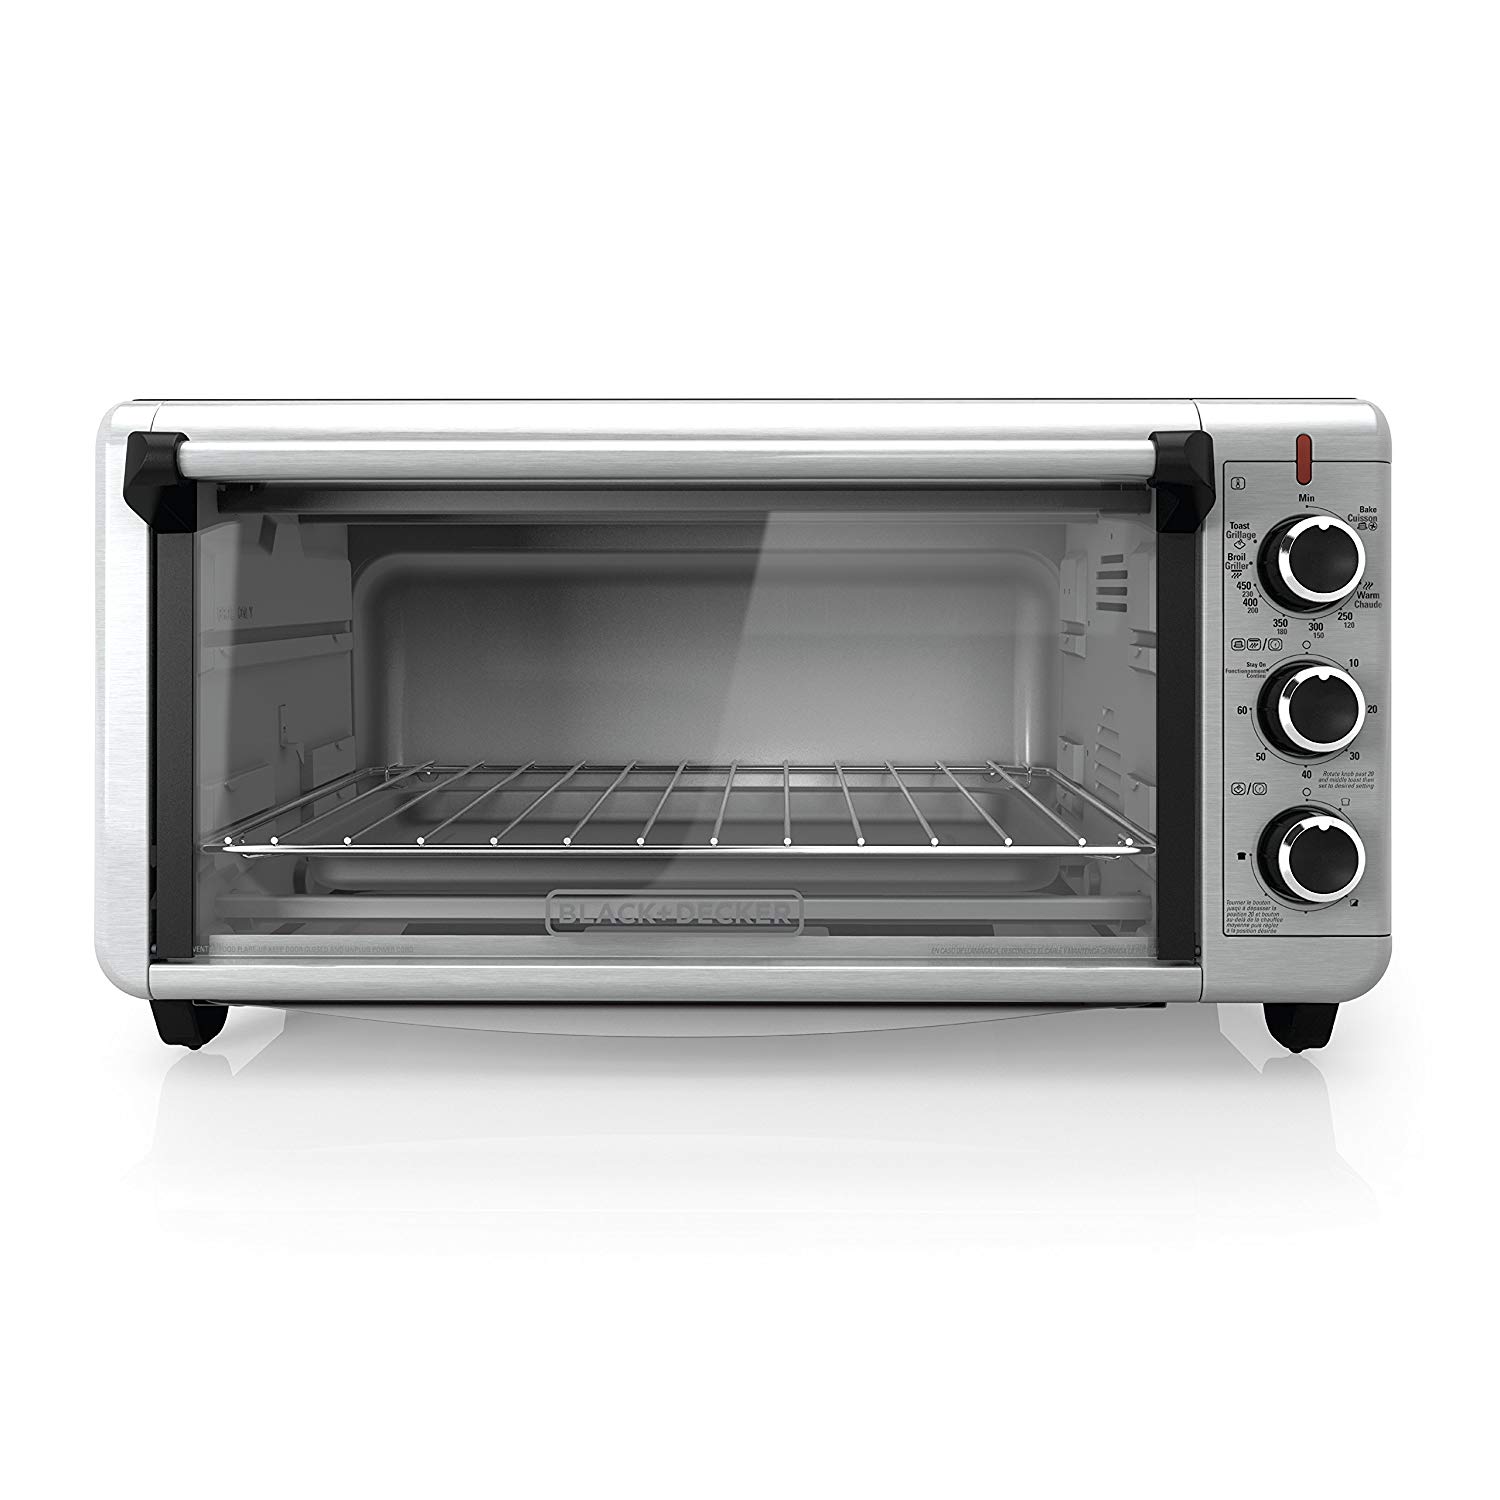 An image related to Black and Decker TO3240XSBD Black Stainless Steel Convection Countertop Extra Wide Eight Slice Toaster Oven